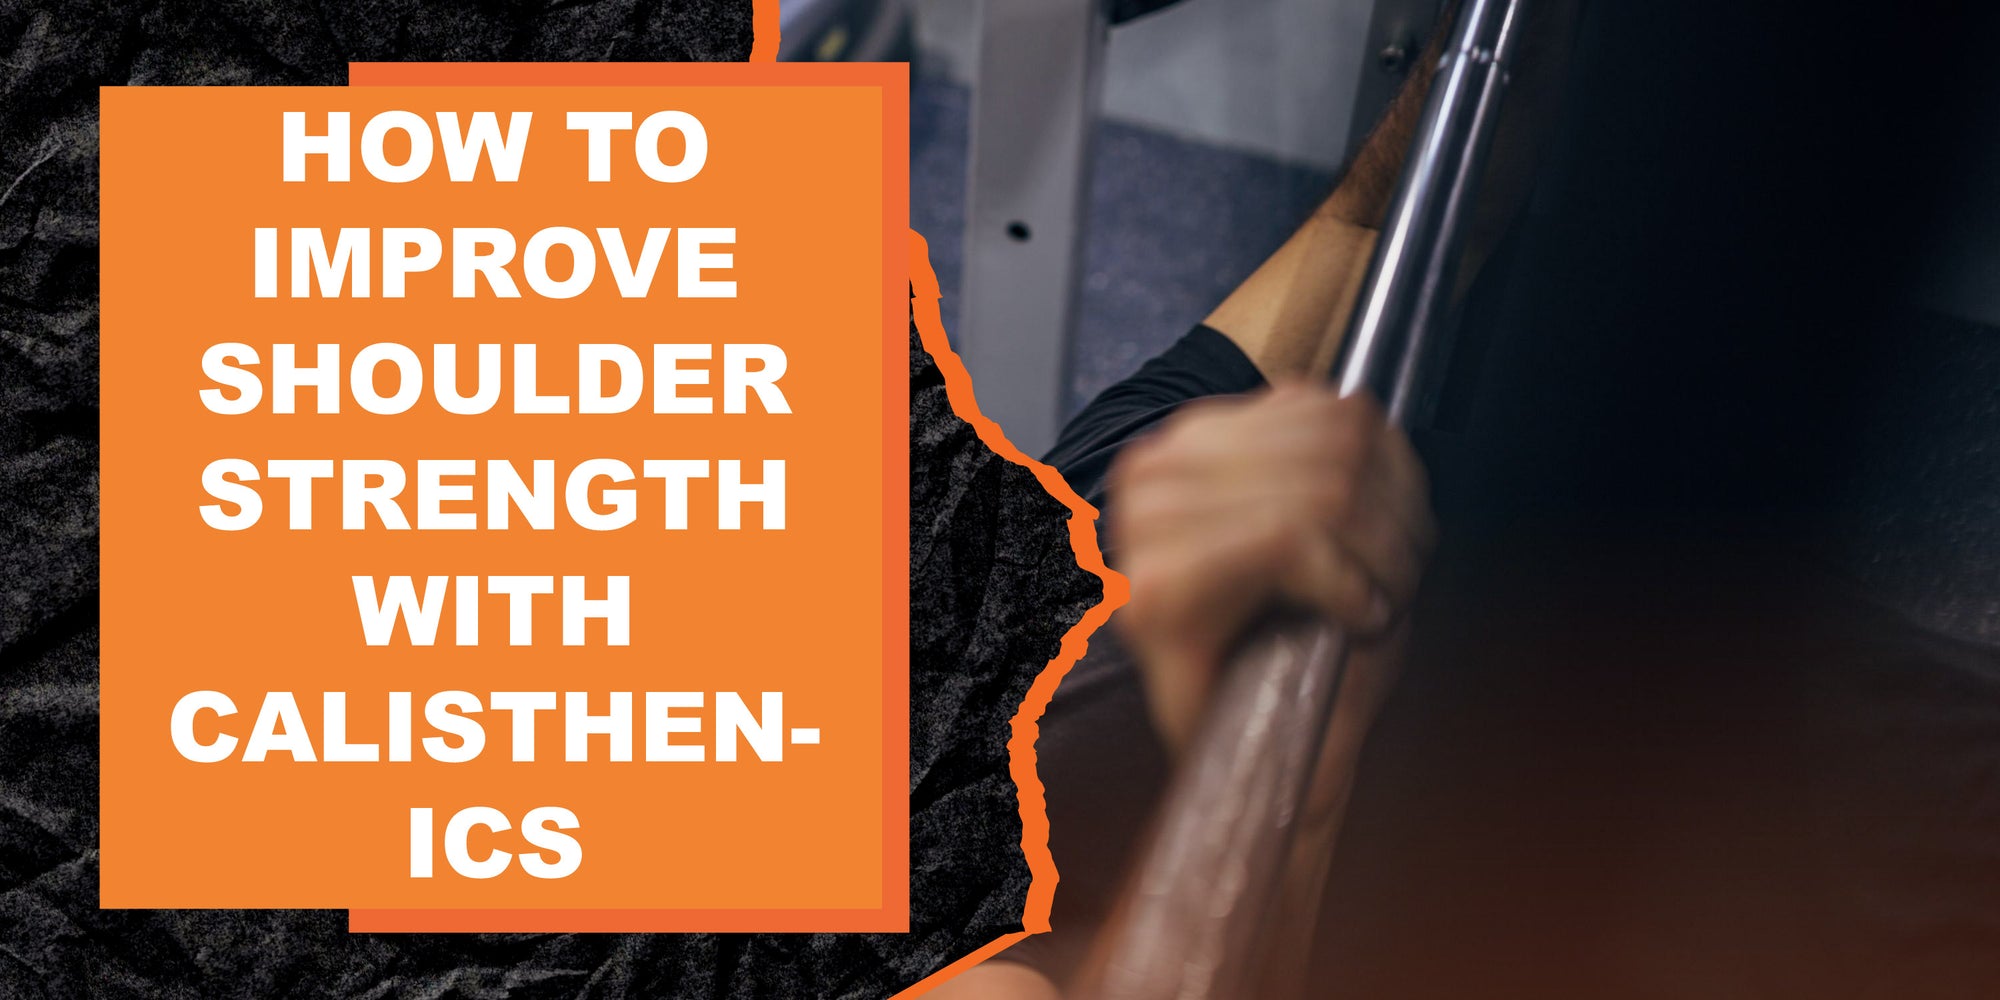 How to Improve Shoulder Strength with Calisthenics